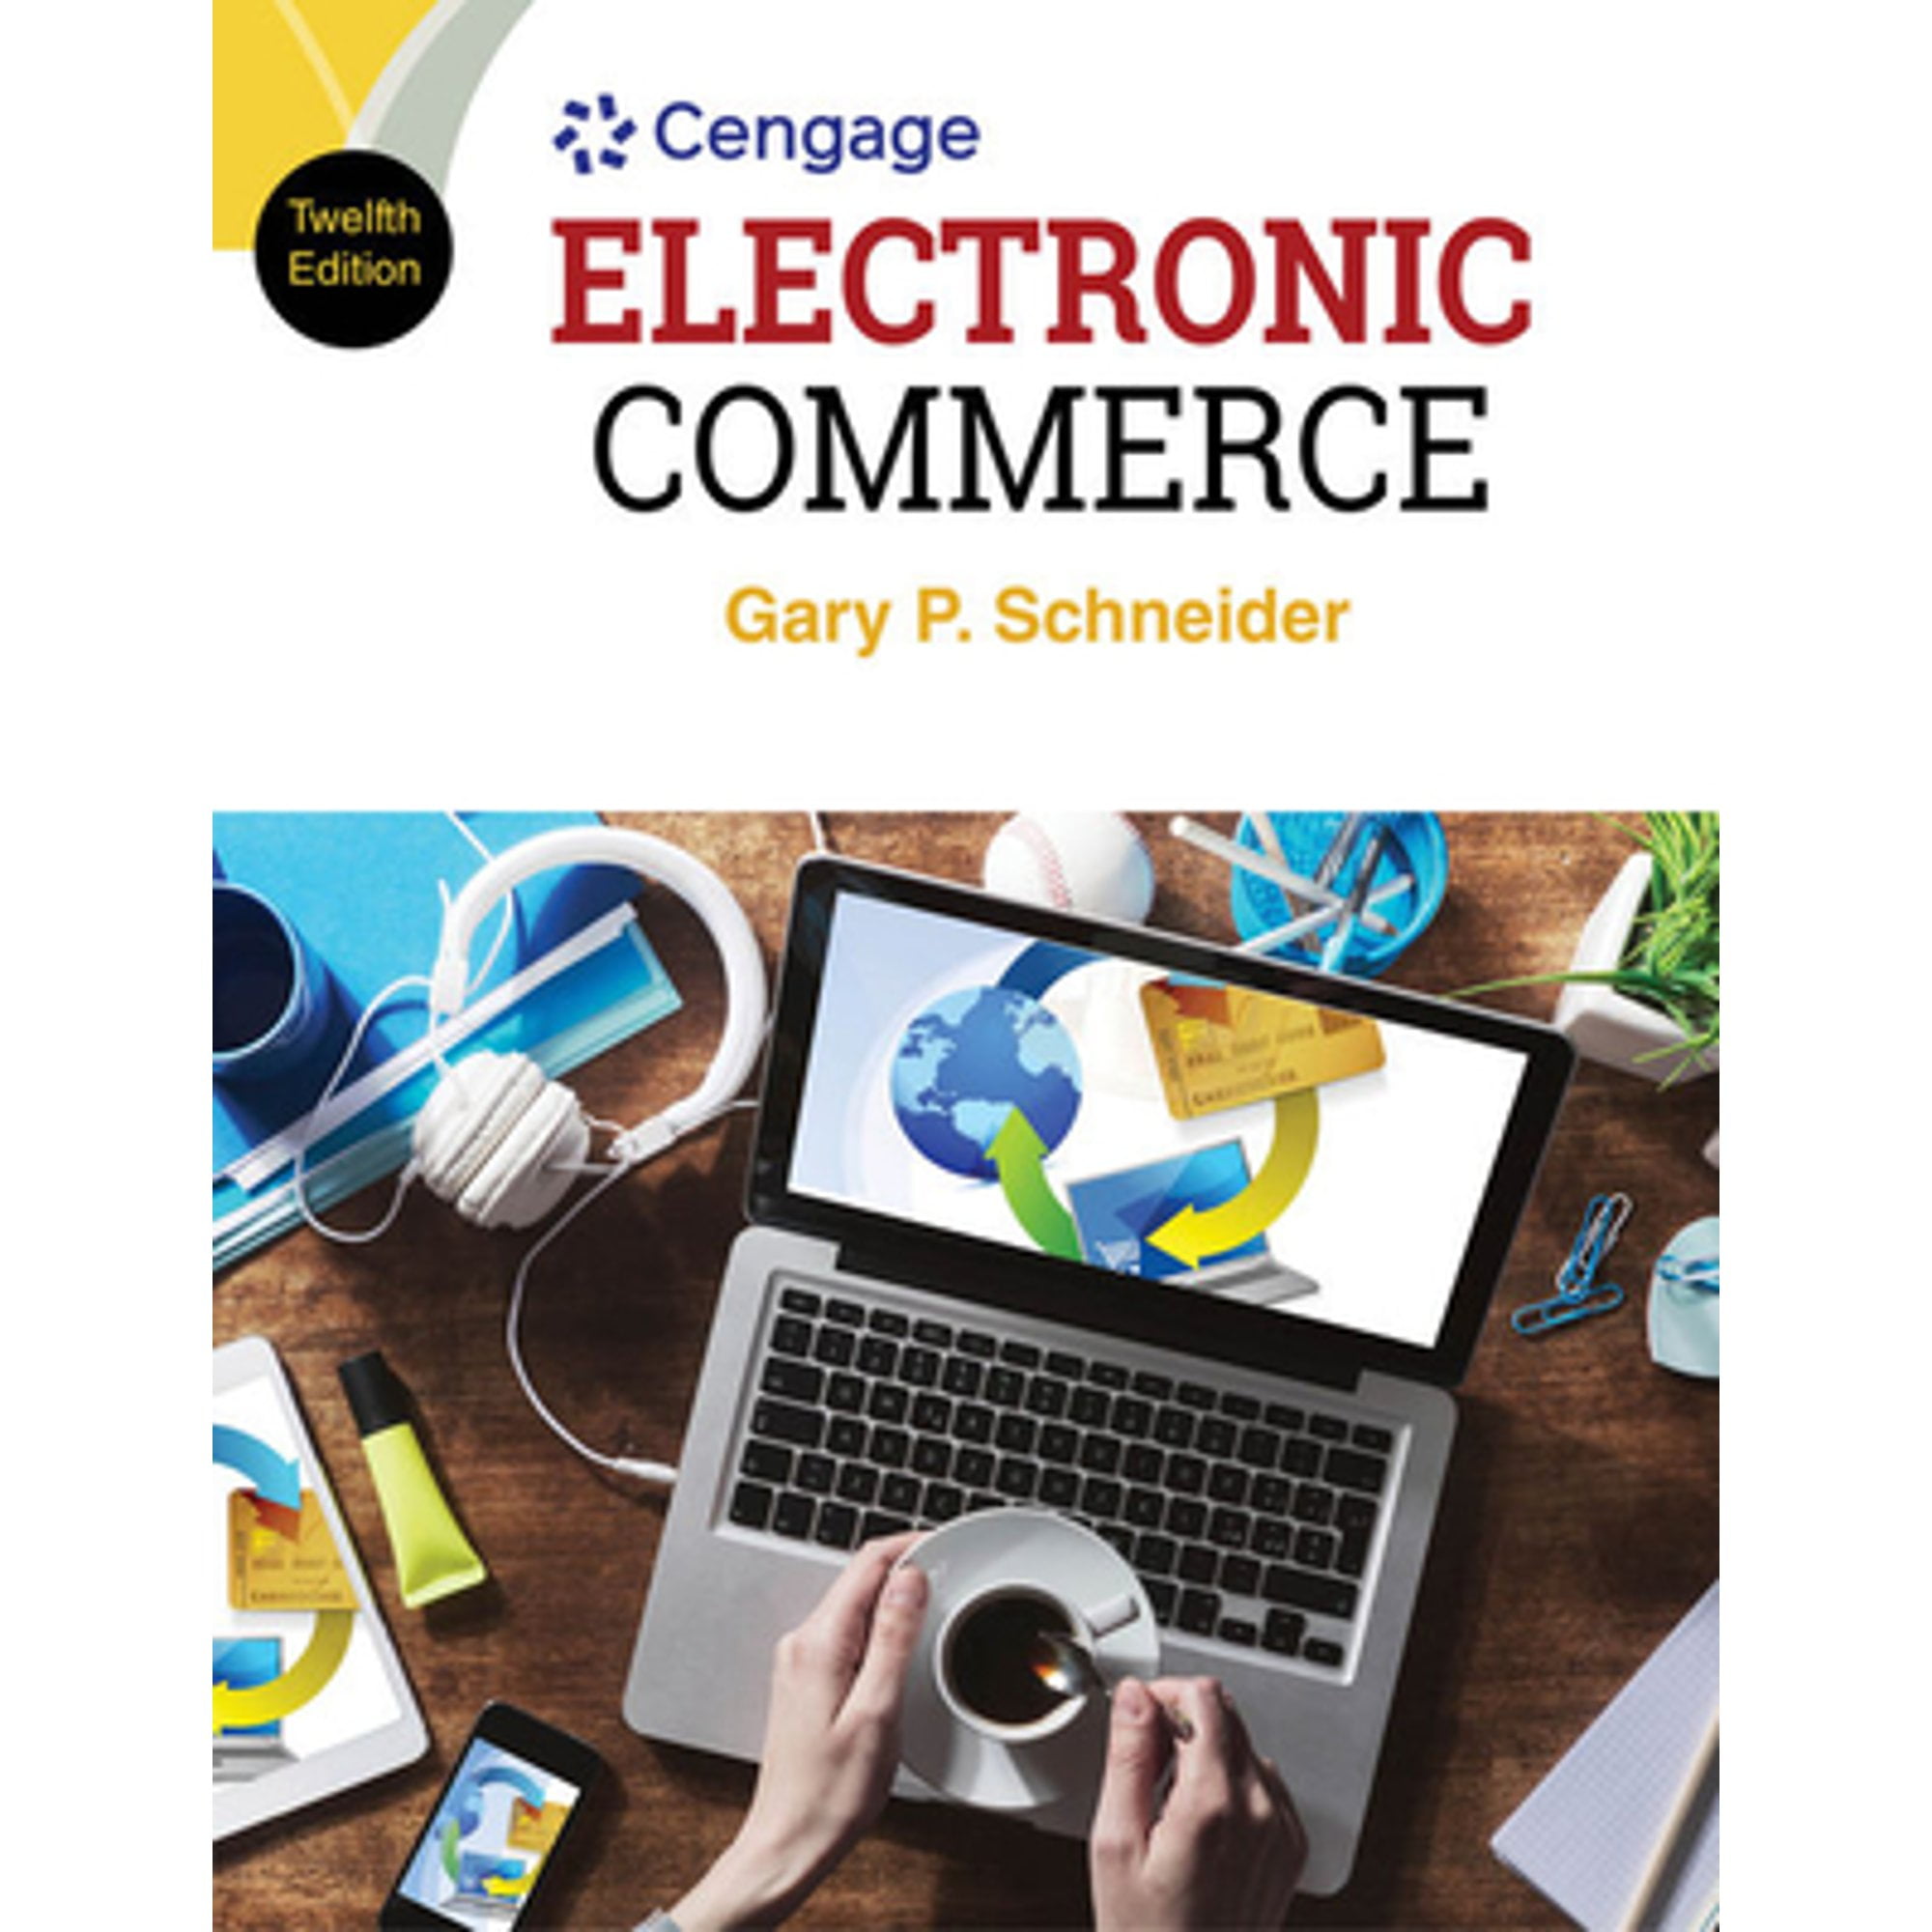 9781305867819)　by　Commerce　(Paperback　Pre-Owned　Schneider　Electronic　Gary